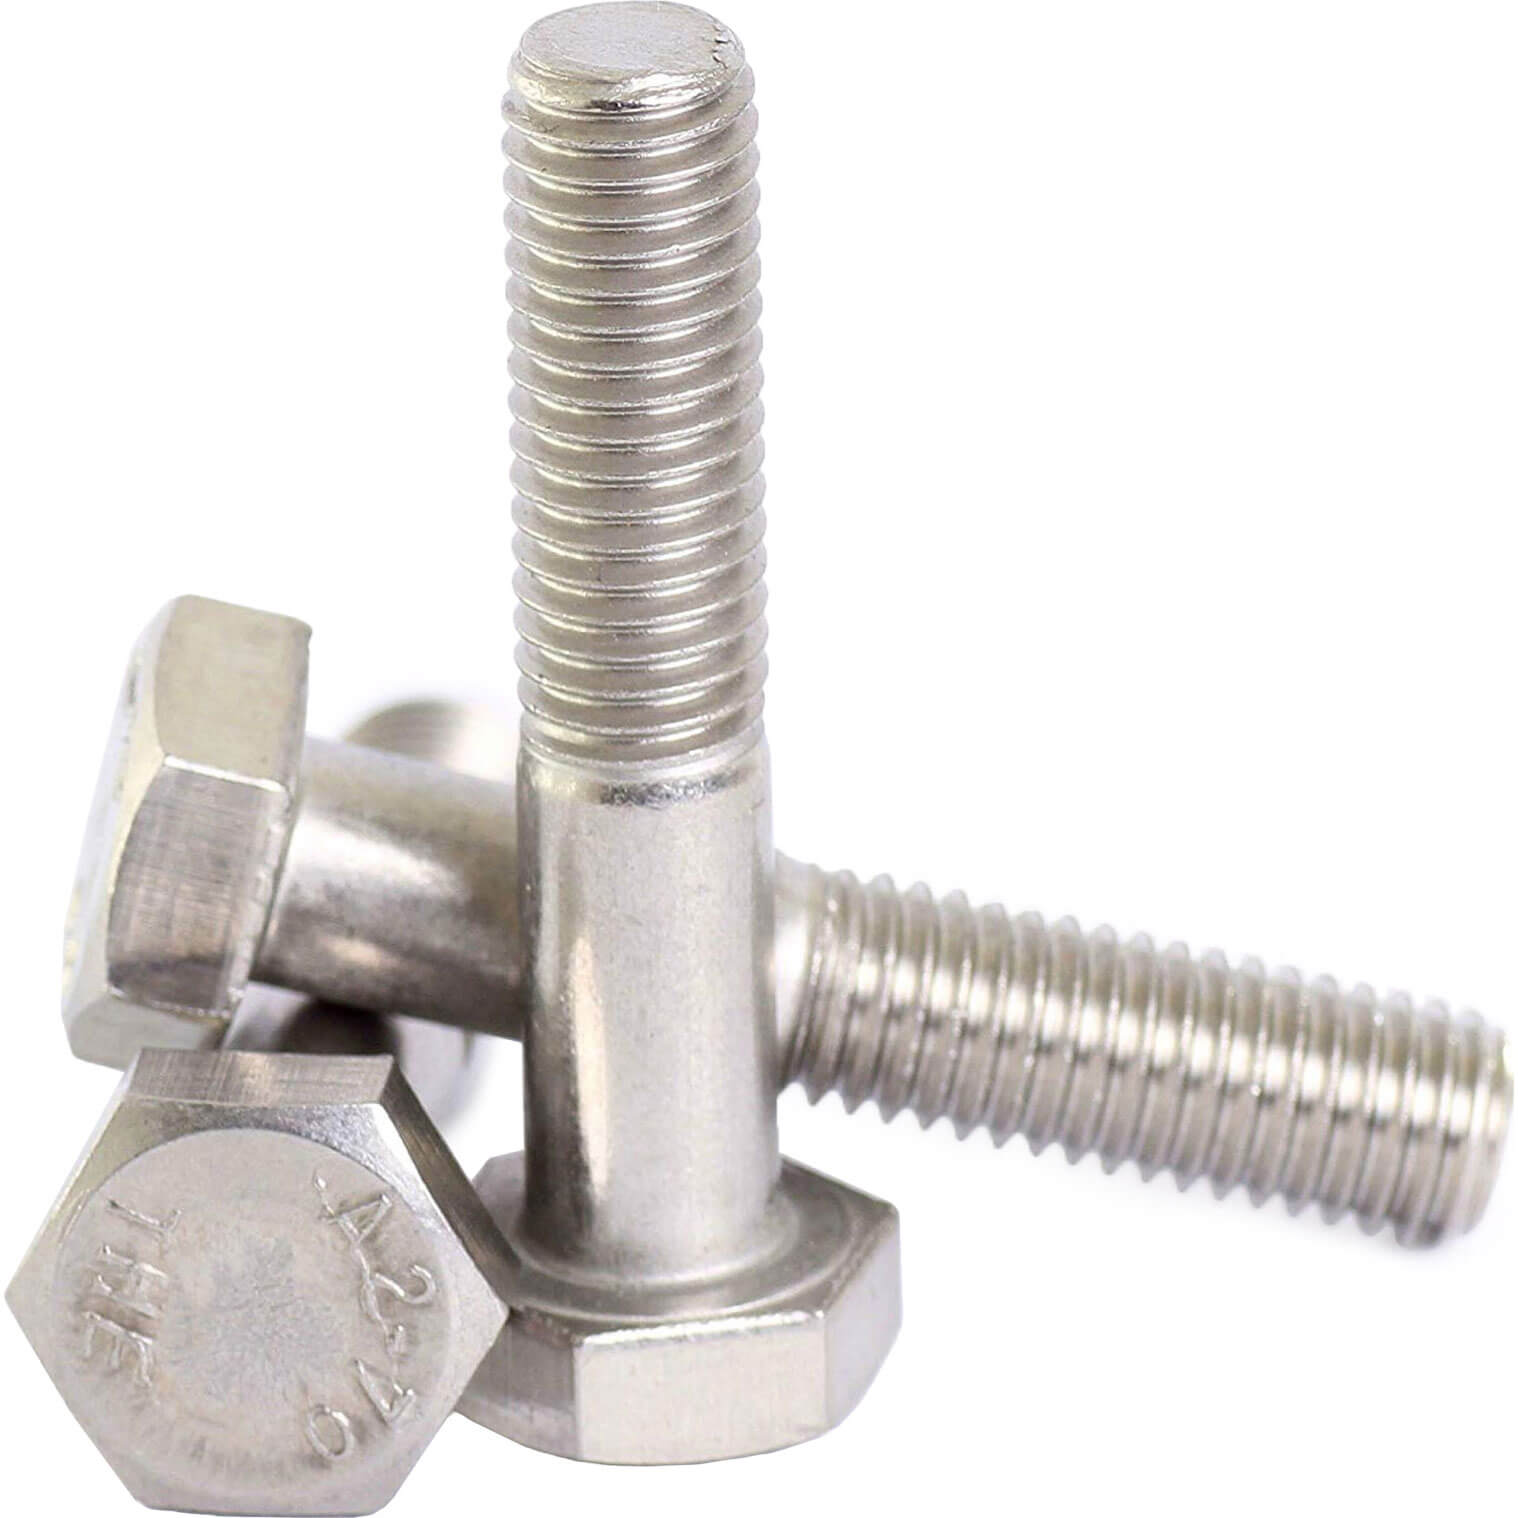 Image of Sirius Bolts A2 304 Stainless Steel M16 100mm Pack of 1